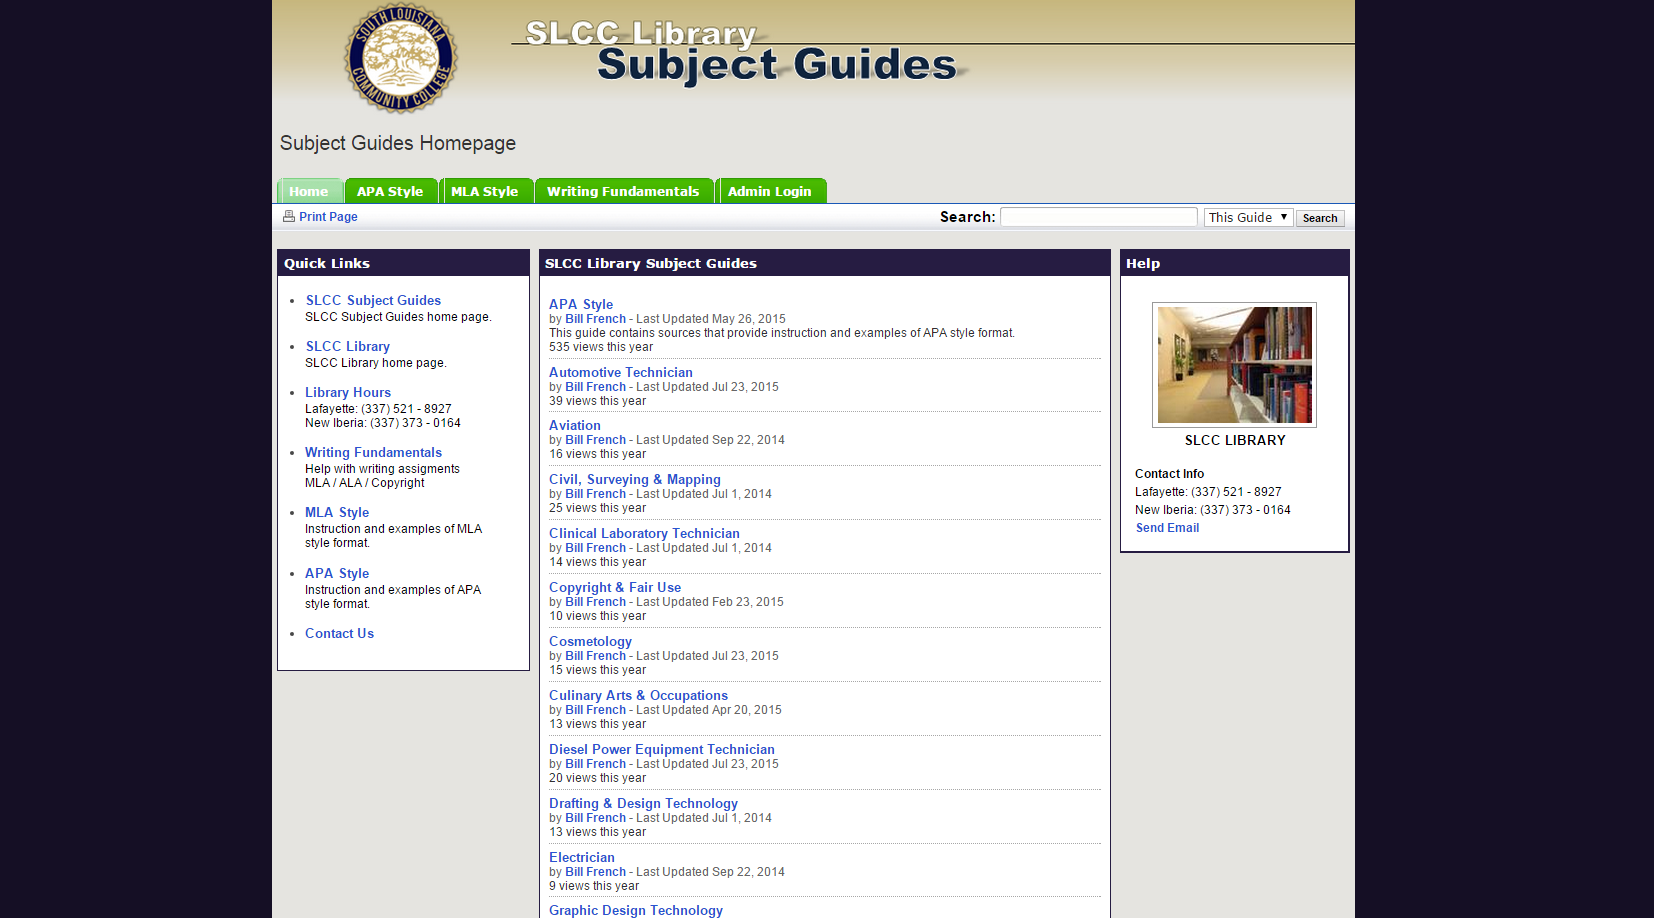 Subject guides home page